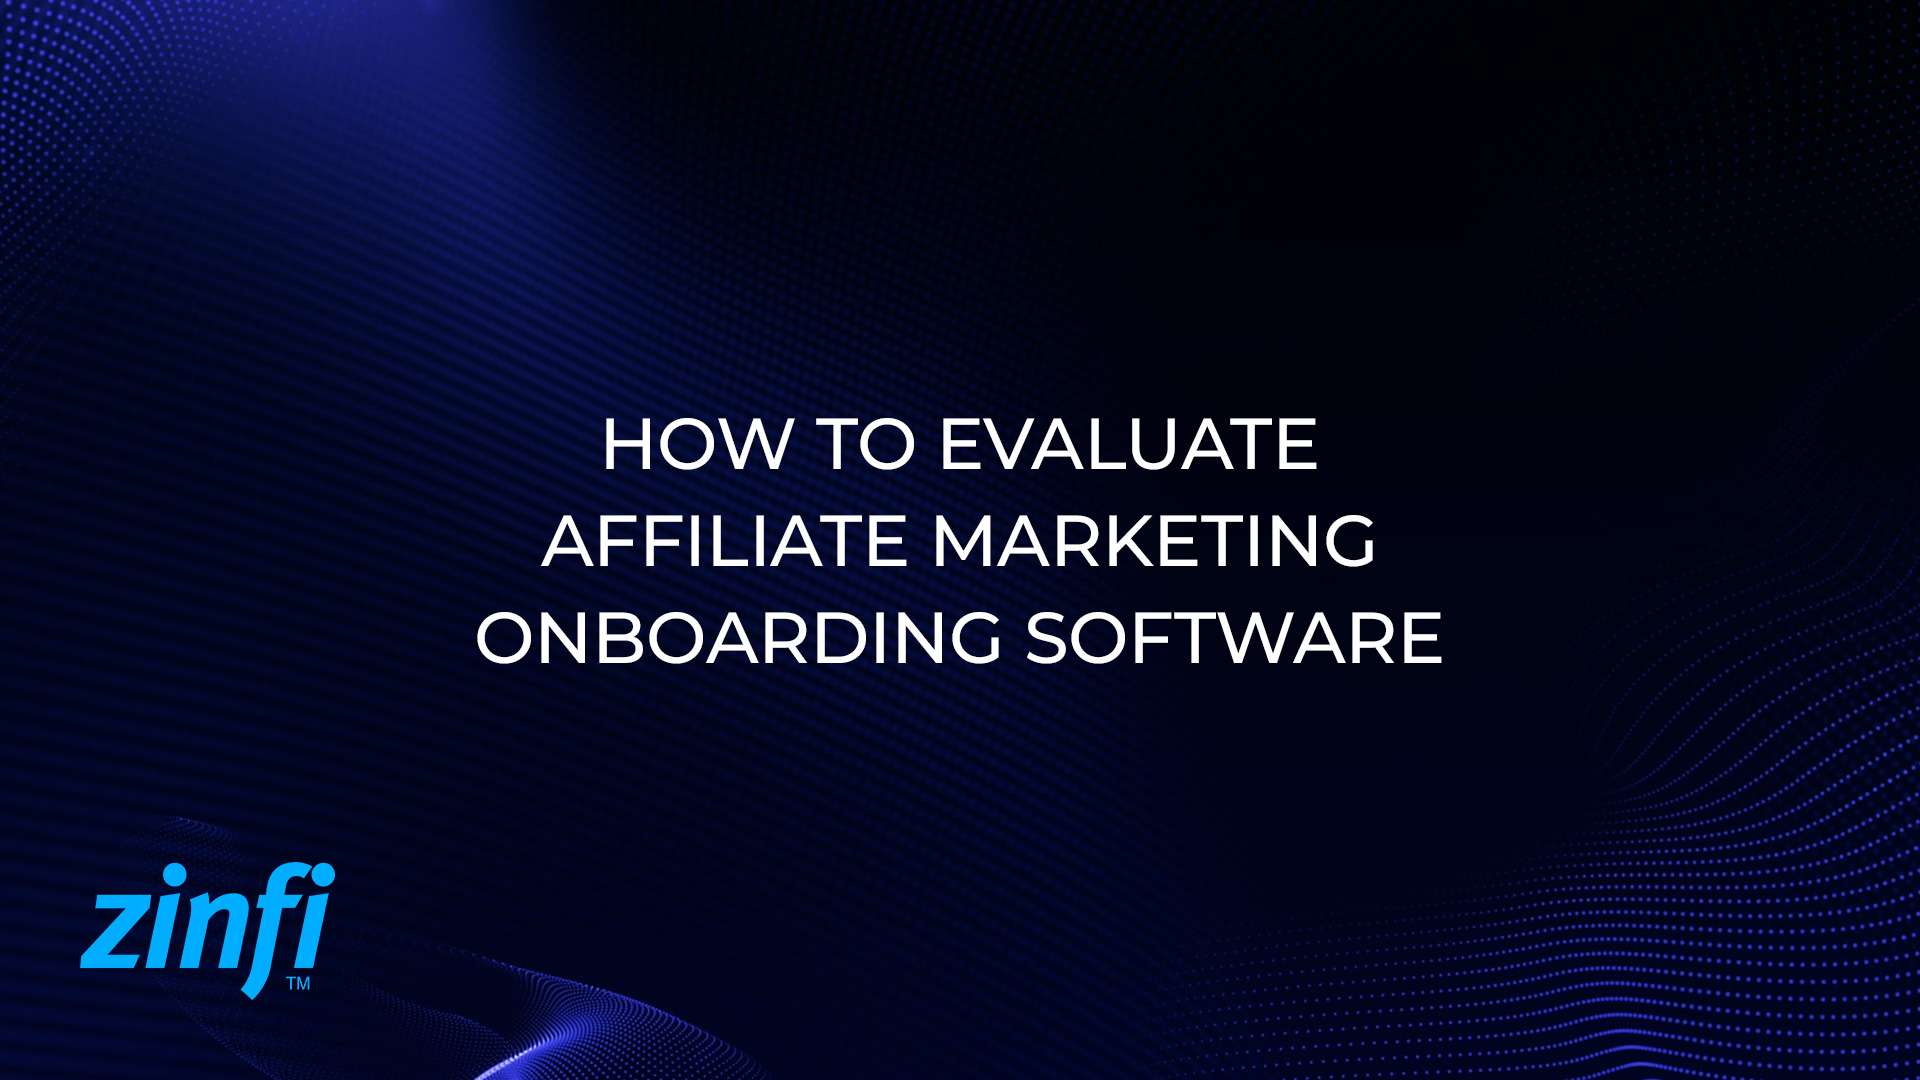 How to Evaluate Affiliate Marketing Onboarding Software